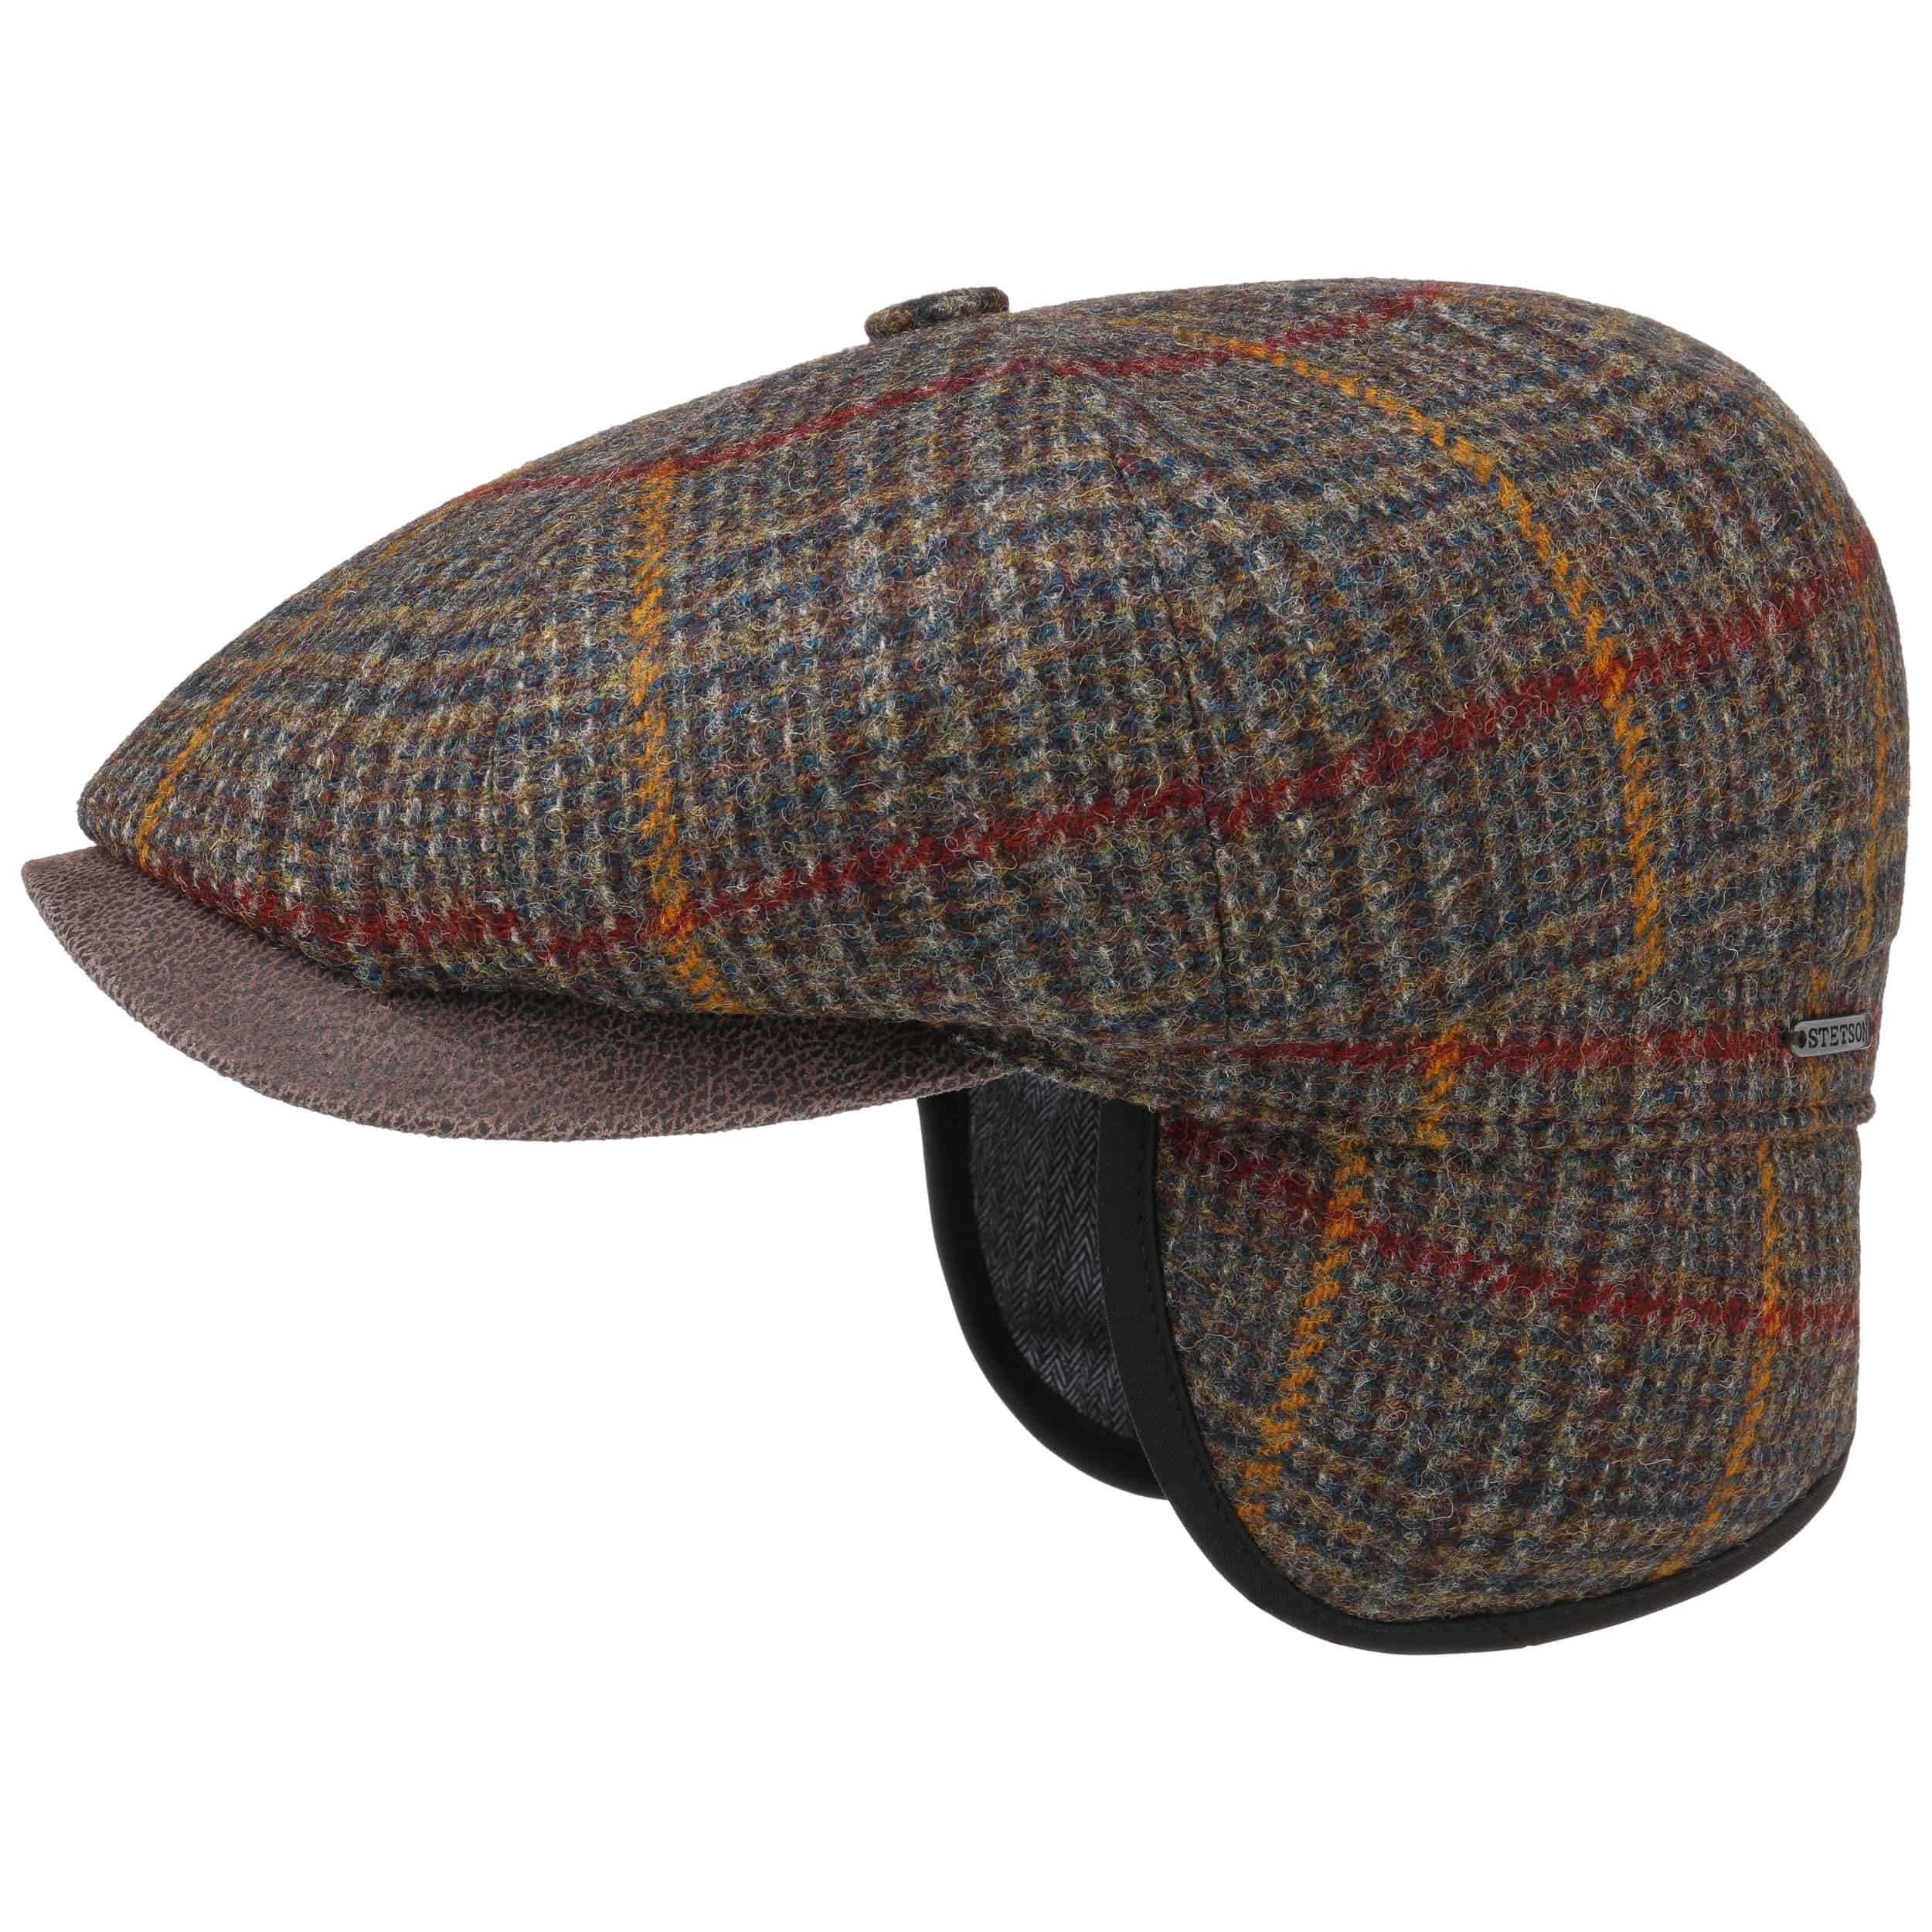 Hatteras Minto Flat Cap with Ear Flaps by Stetson - 89,00